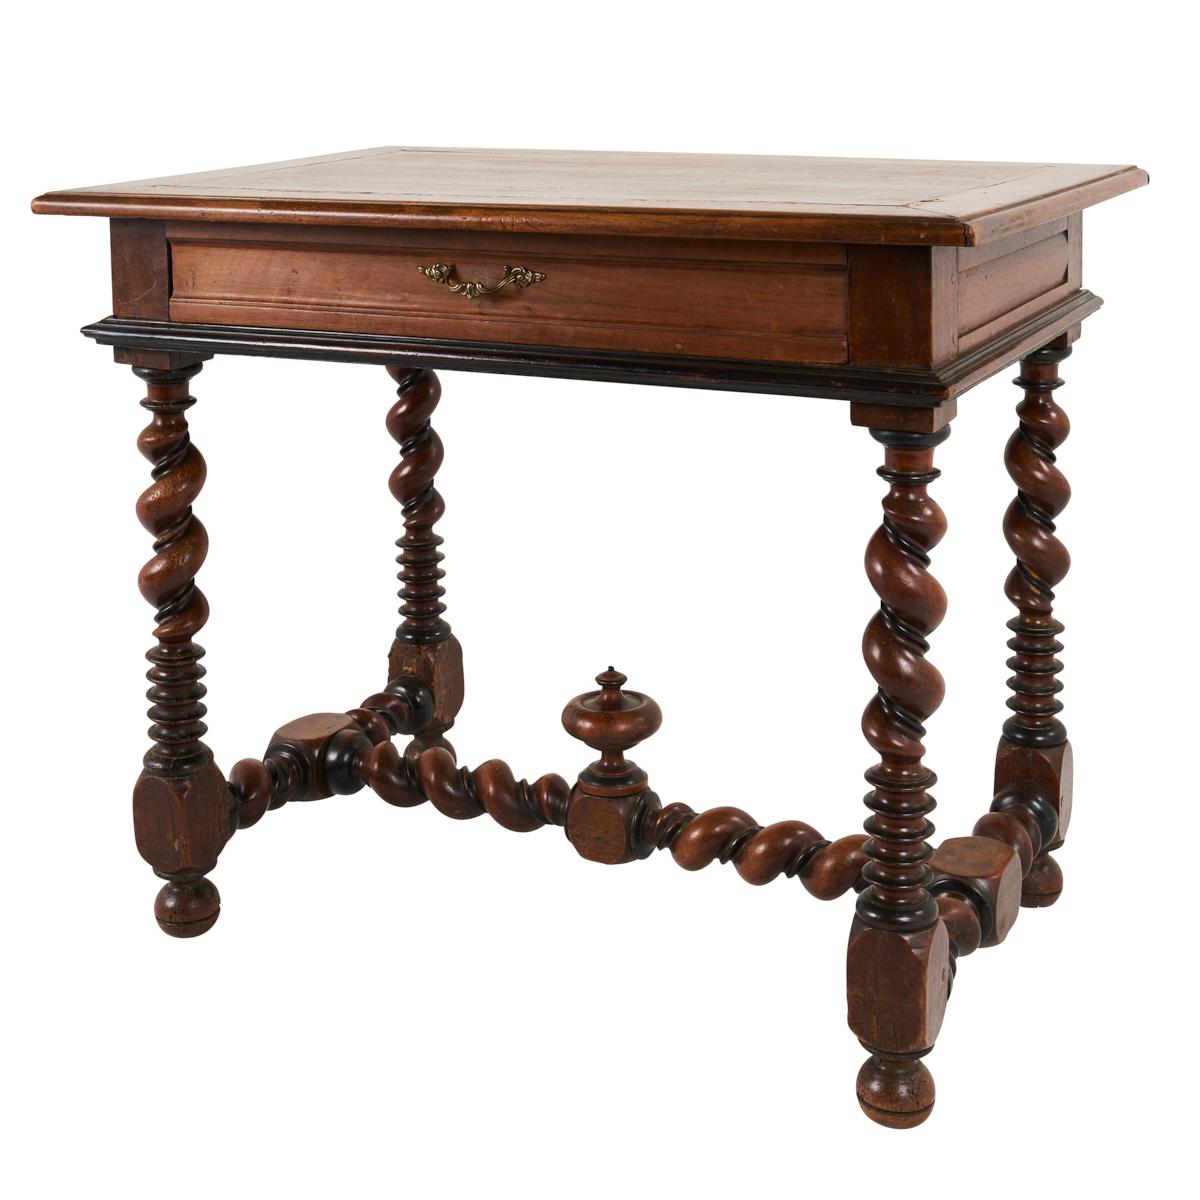 This 18th-century Portuguese side table is a handsome and versatile piece featuring wonderful spiral turned legs and a single drawer. Made of walnut, it has a warmth, presence and infinite uses.
 